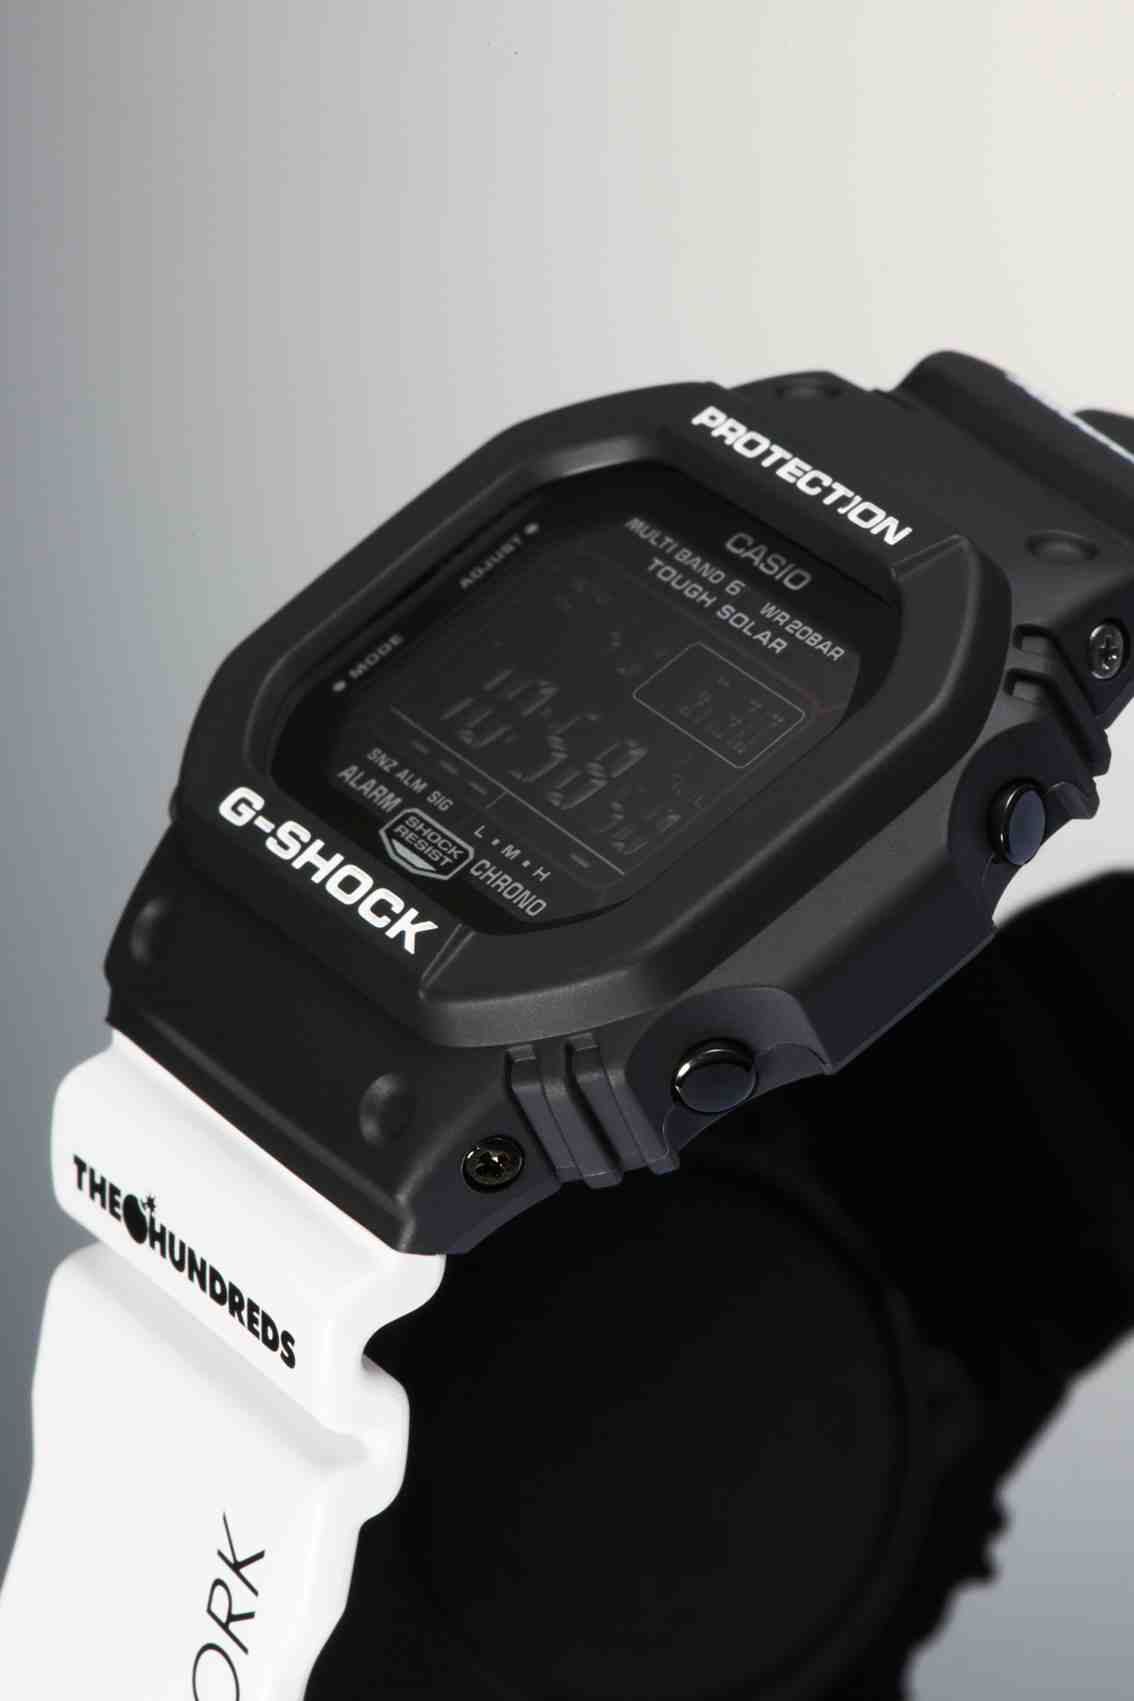 12.01.11.CASIO  - G-Shock & The Hundreds Release Second Limited Edition Collaboration